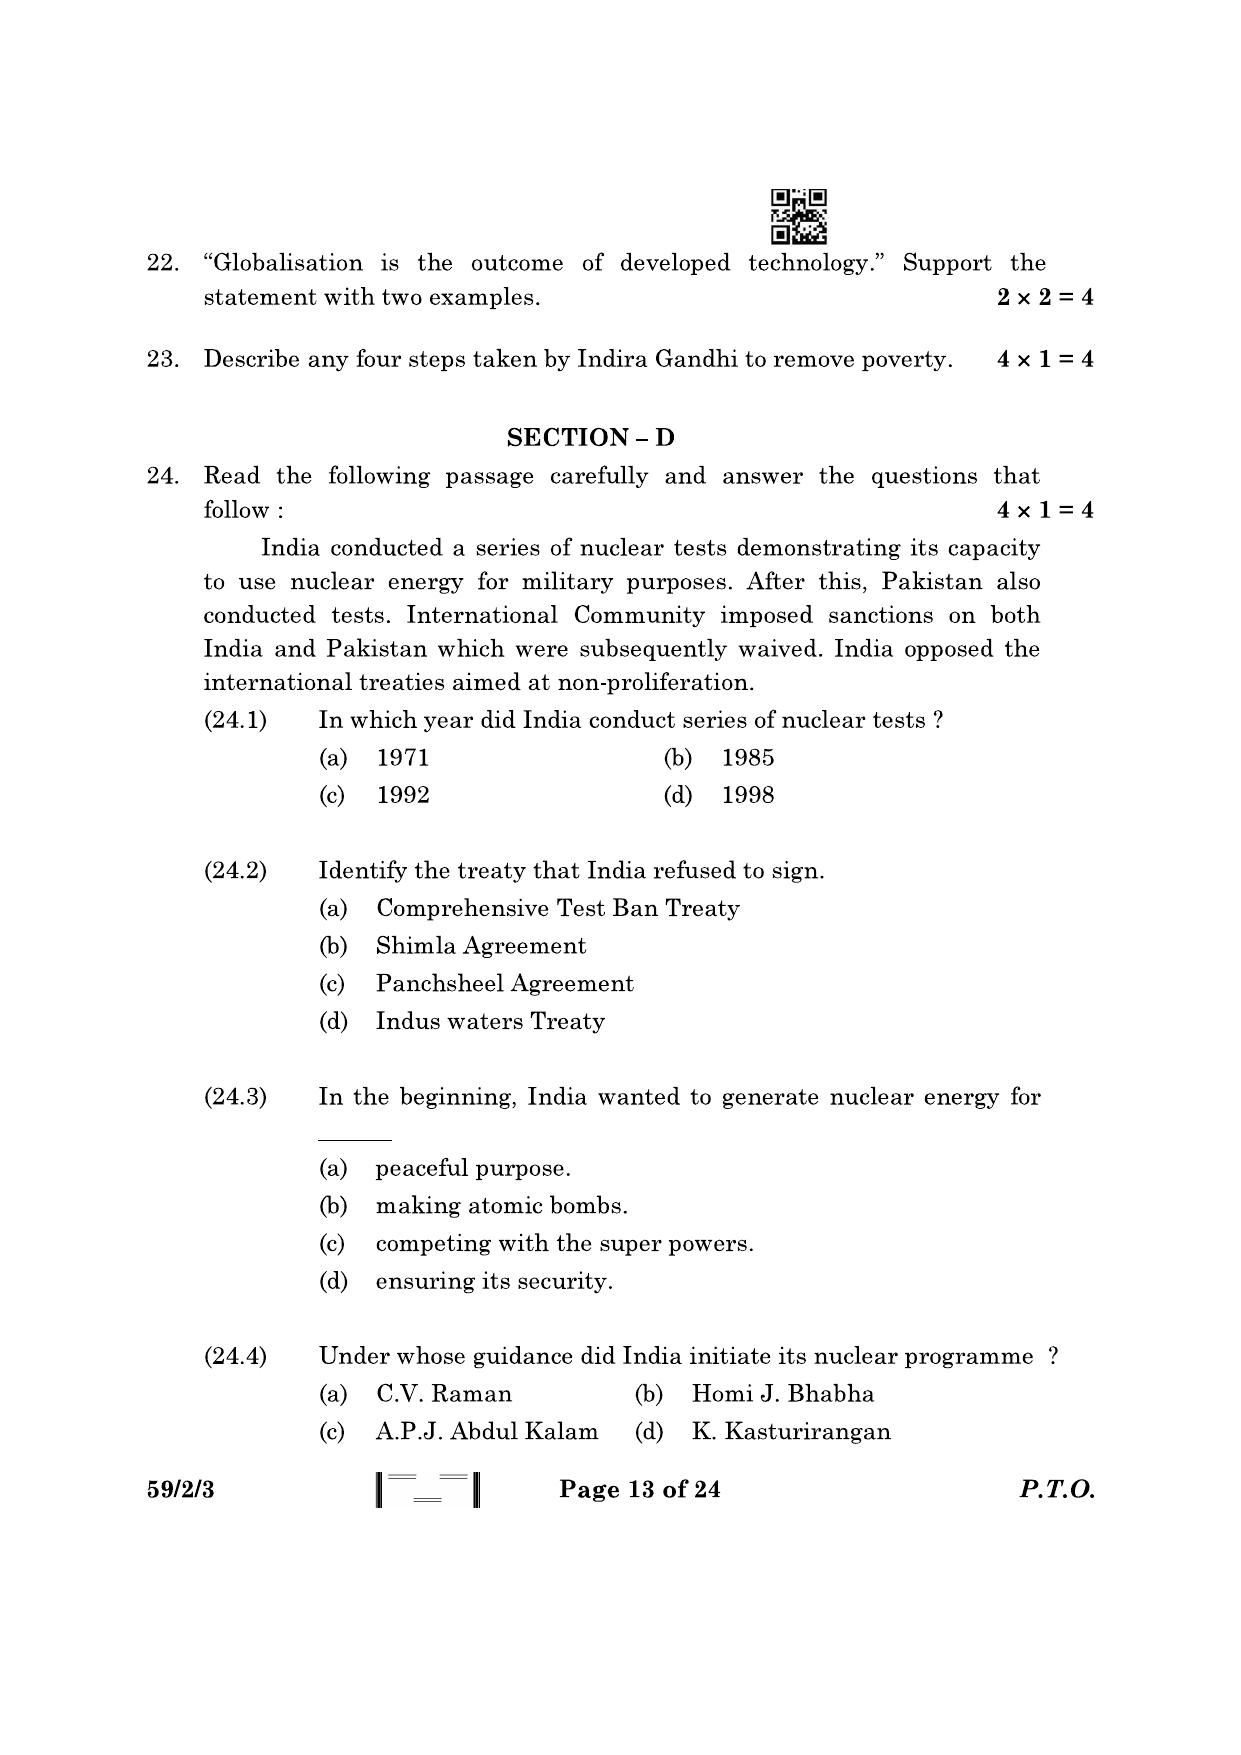 CBSE Class 12 59-2-3 Political Science 2023 Question Paper - Page 13